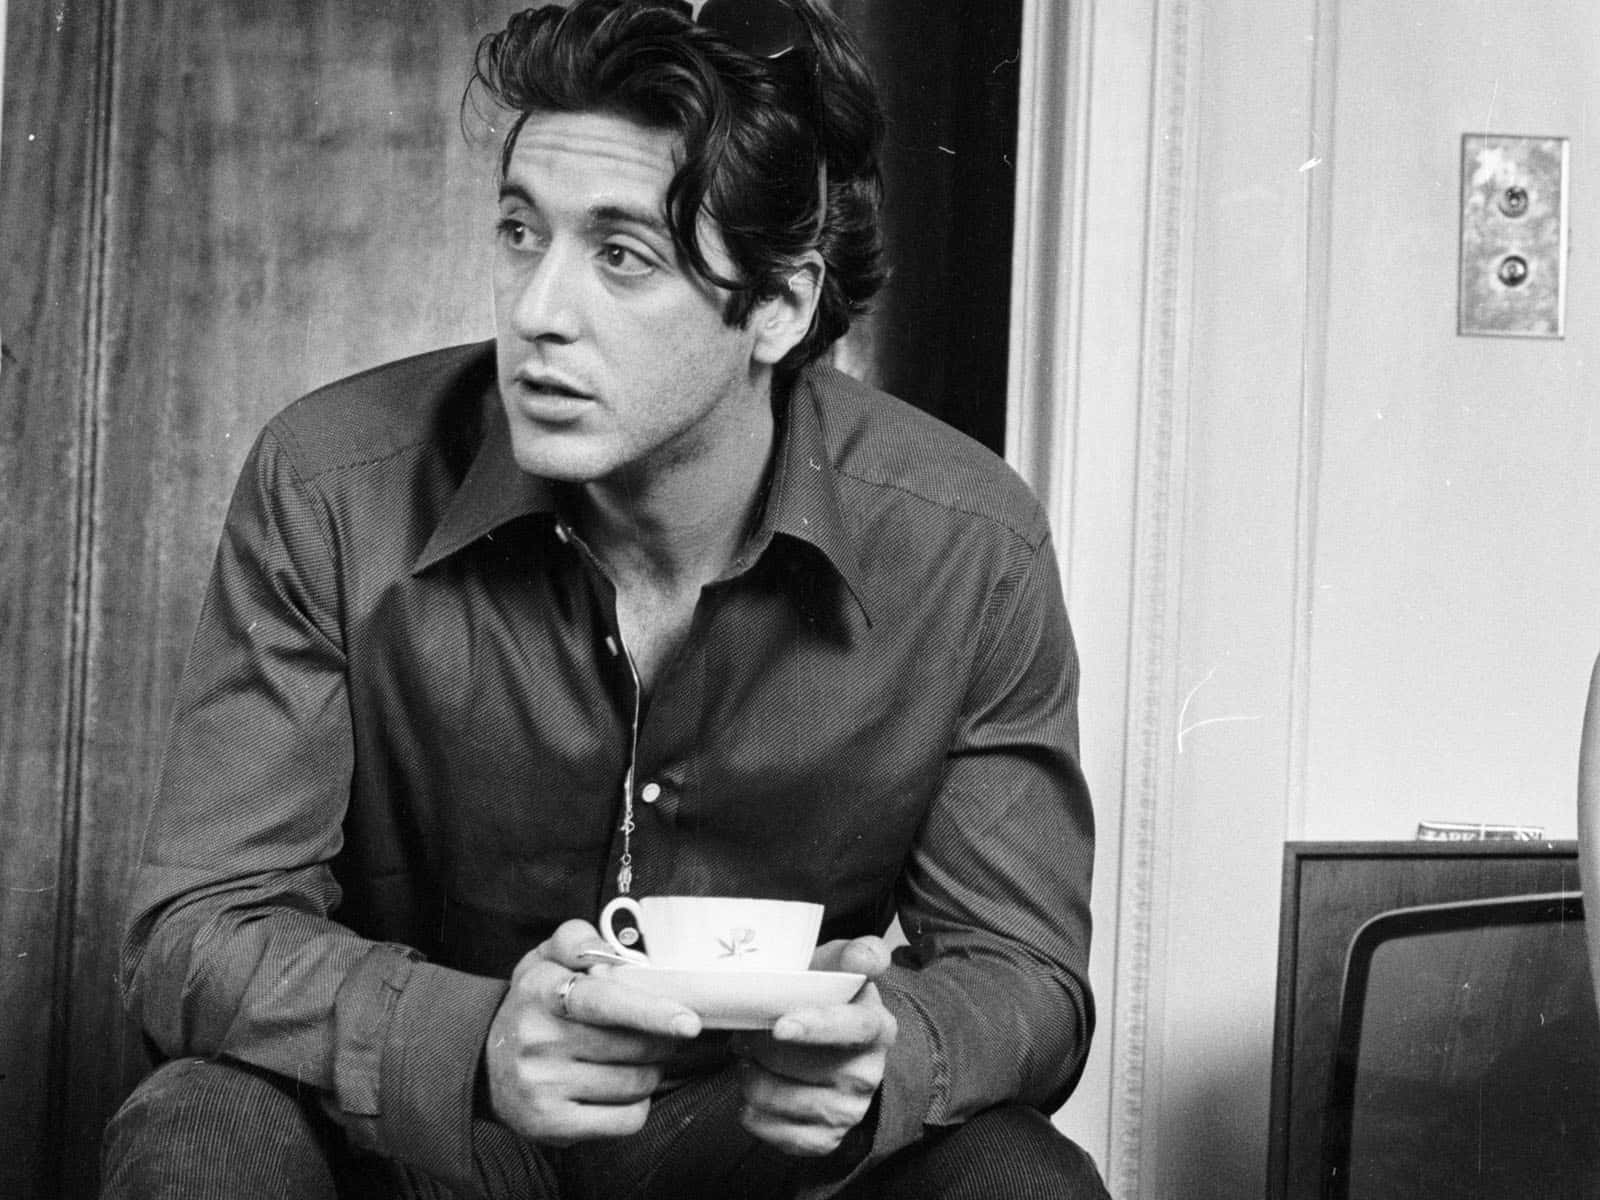 Al Pacino - an iconic actor in the entertainment world